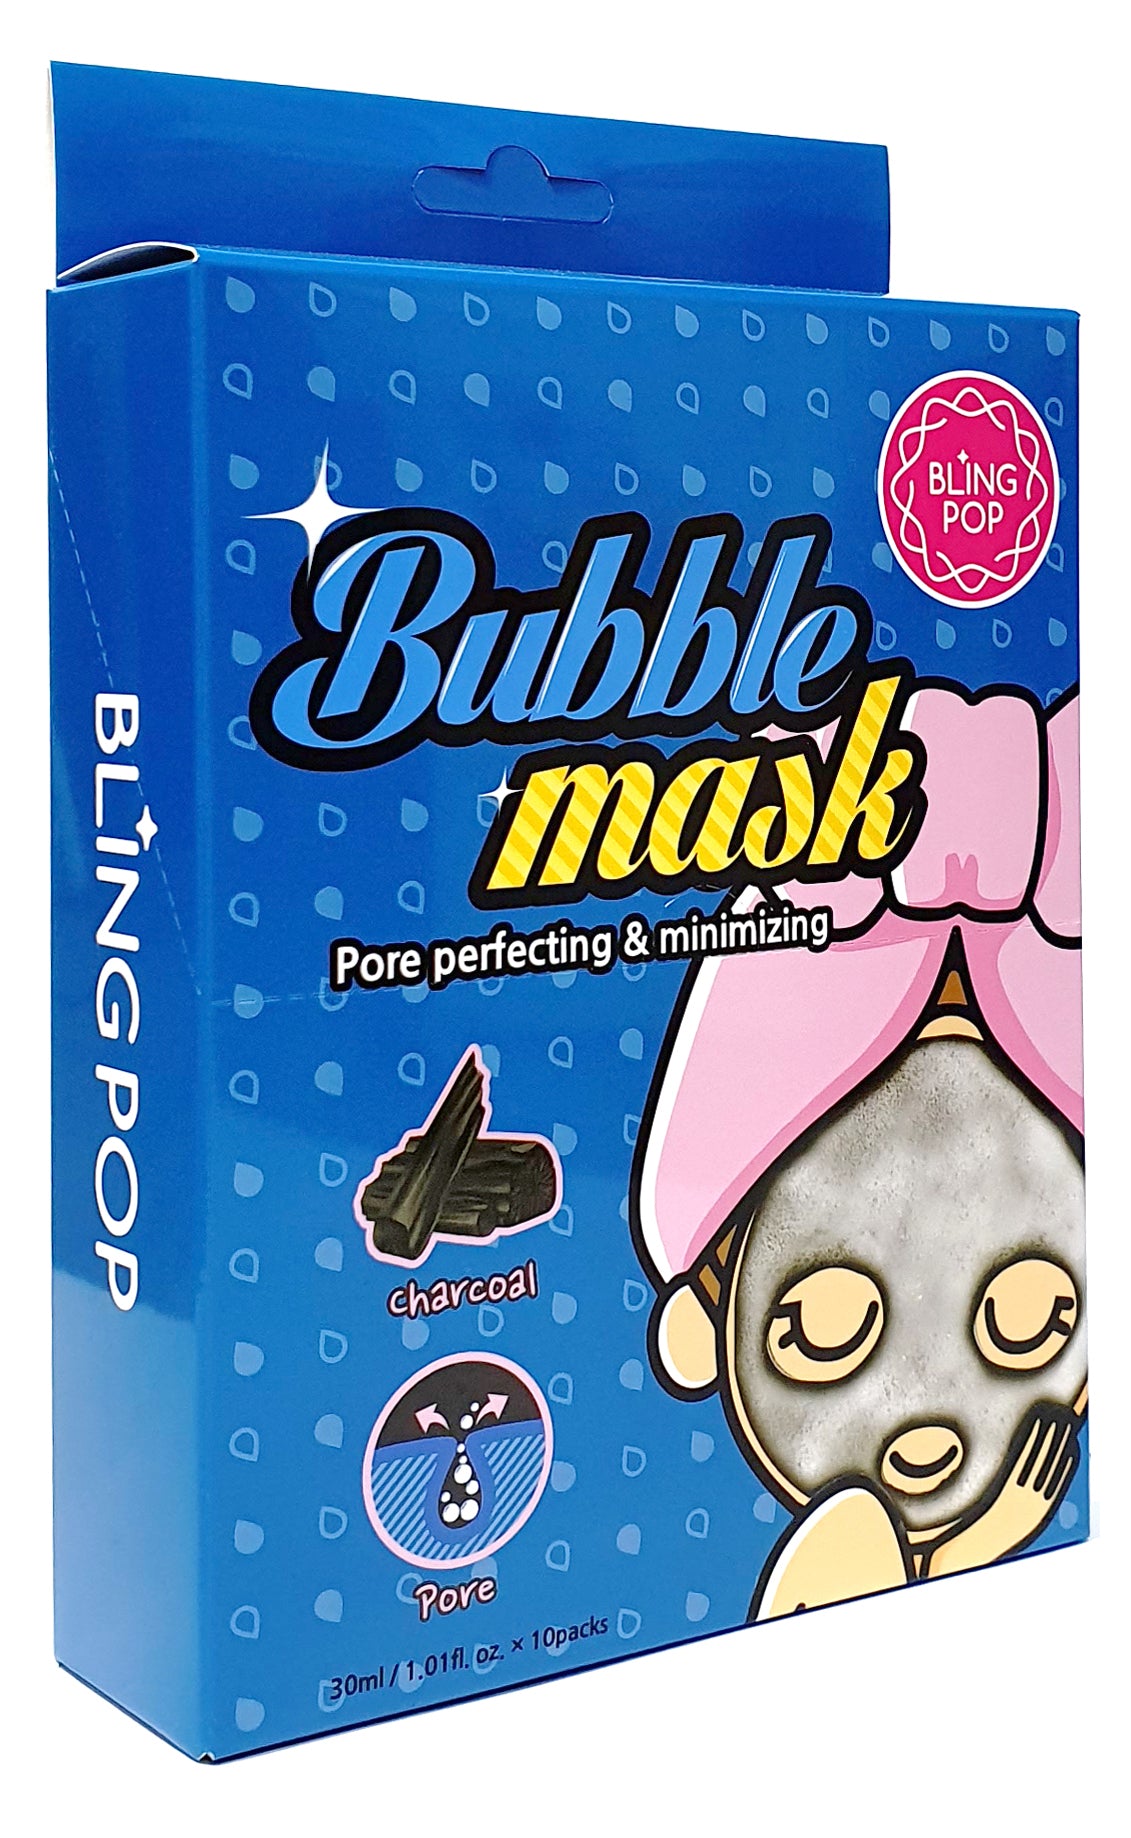 BLING POP Charcoal Face Mask – Nationale